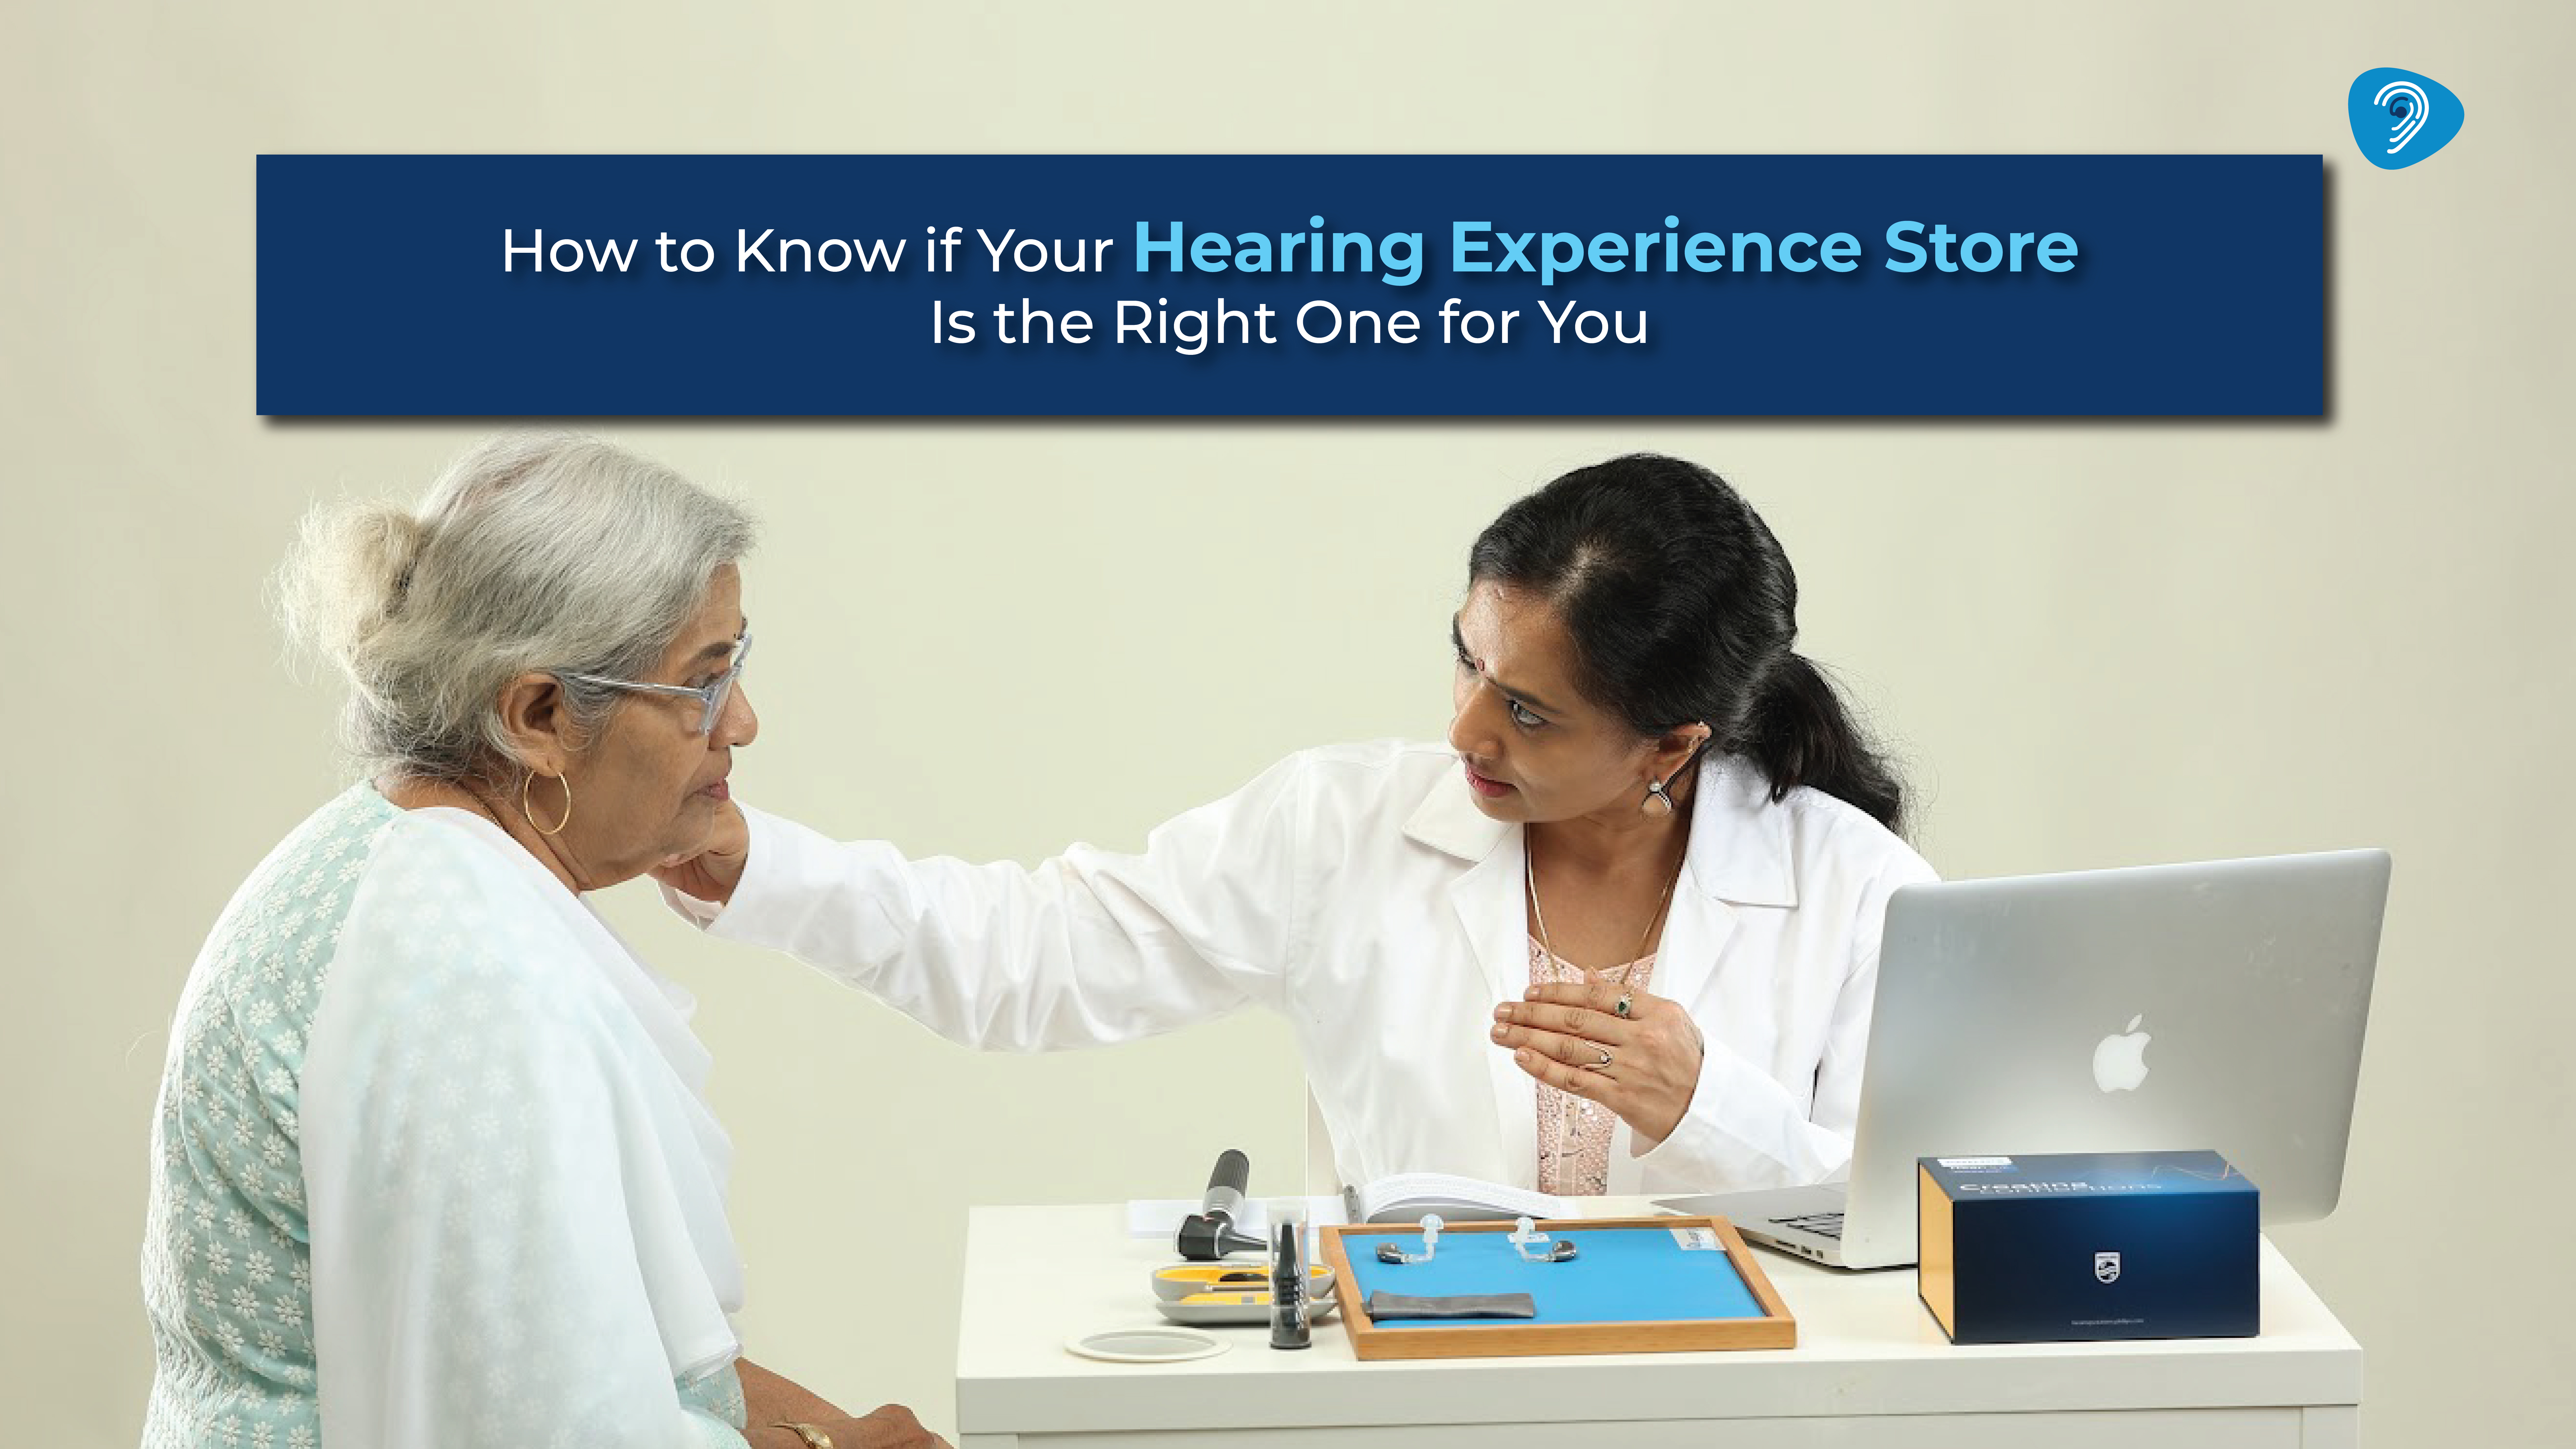 How to Know if Your Hearing Experience Store Is the Right One for You